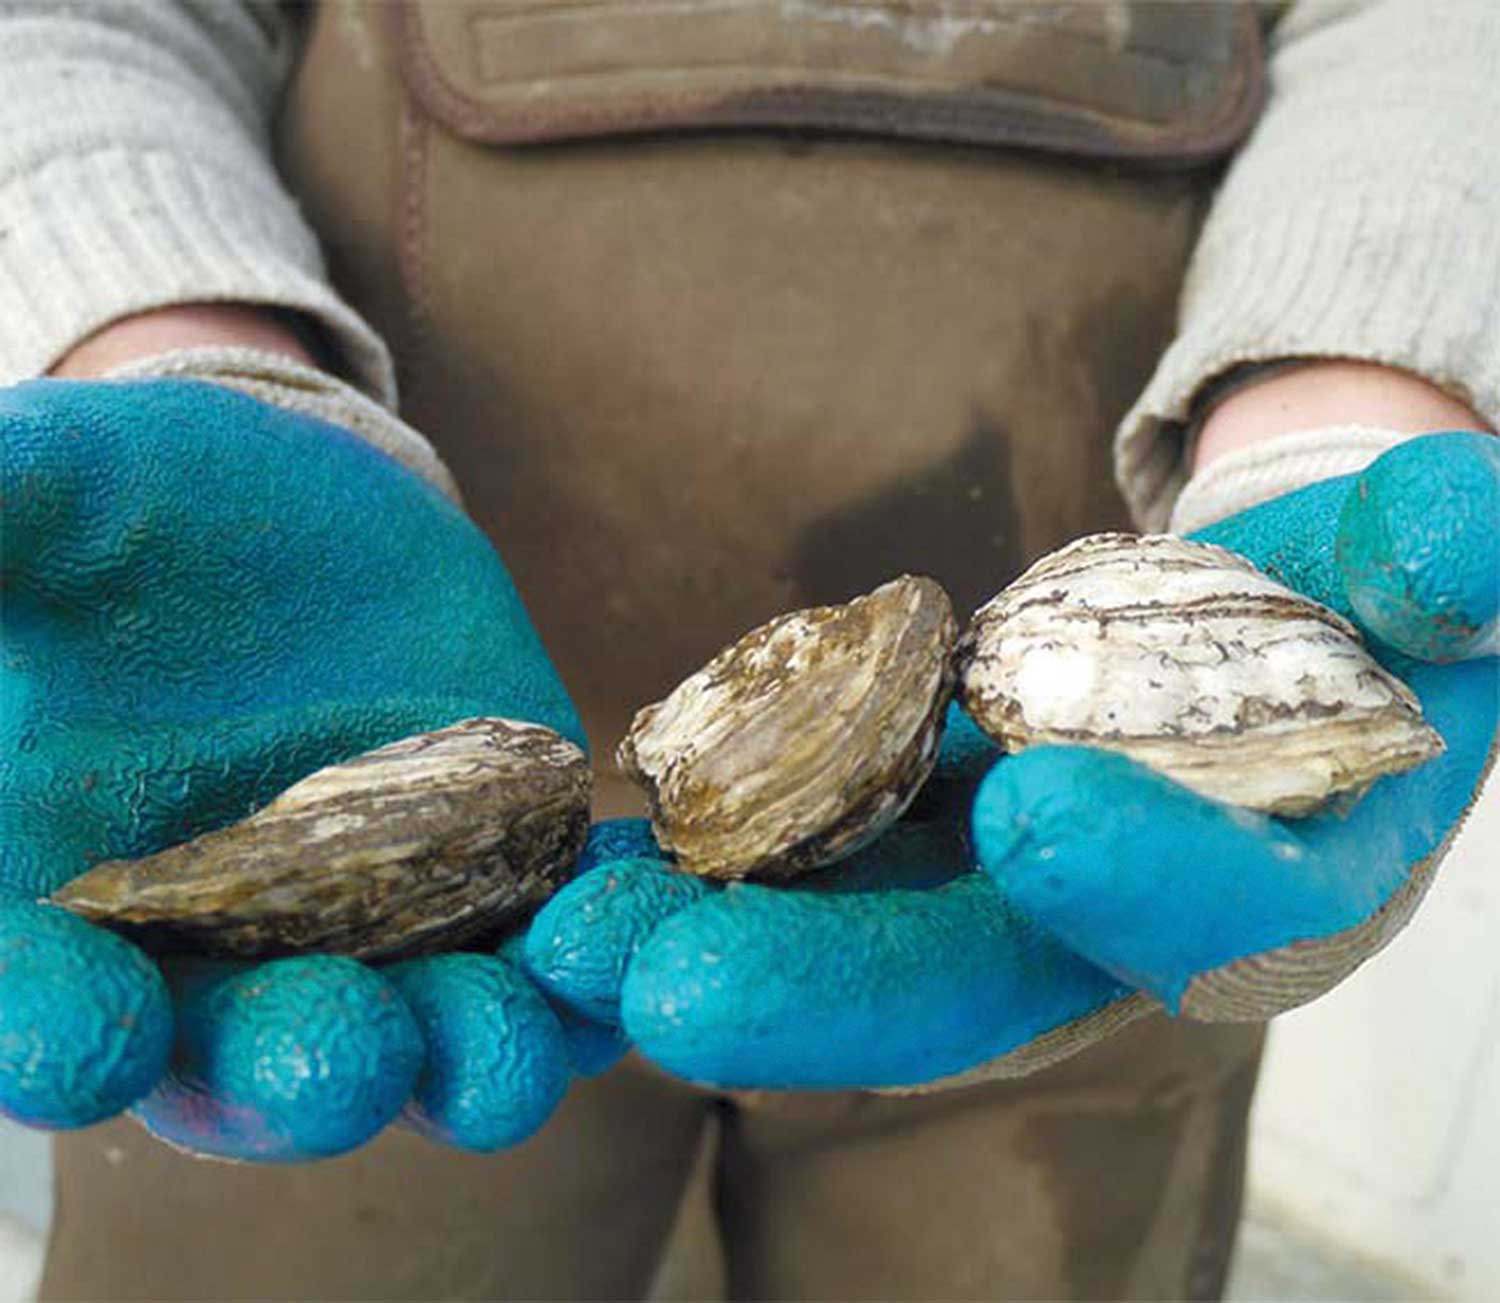 Holding up oysters